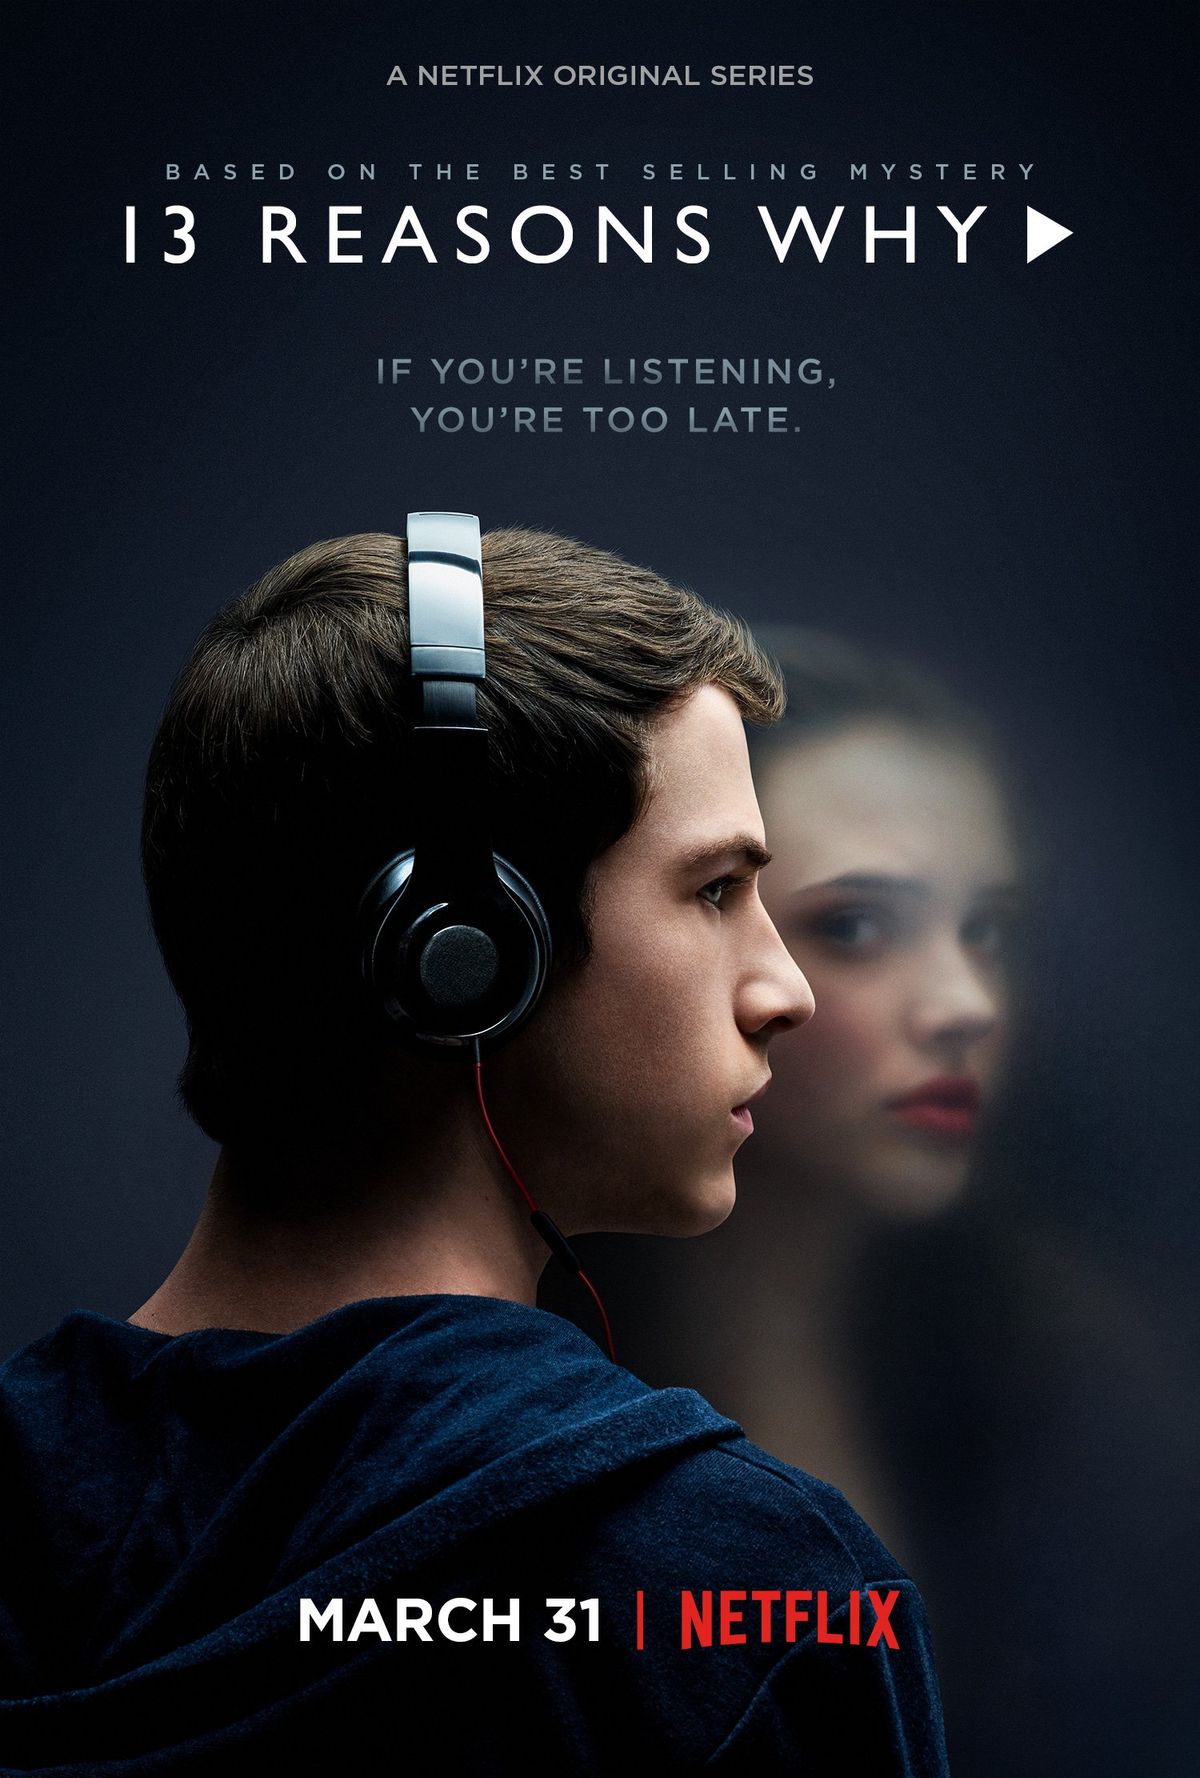 Thirteen Reasons Why You Should Watch "13 Reasons Why"